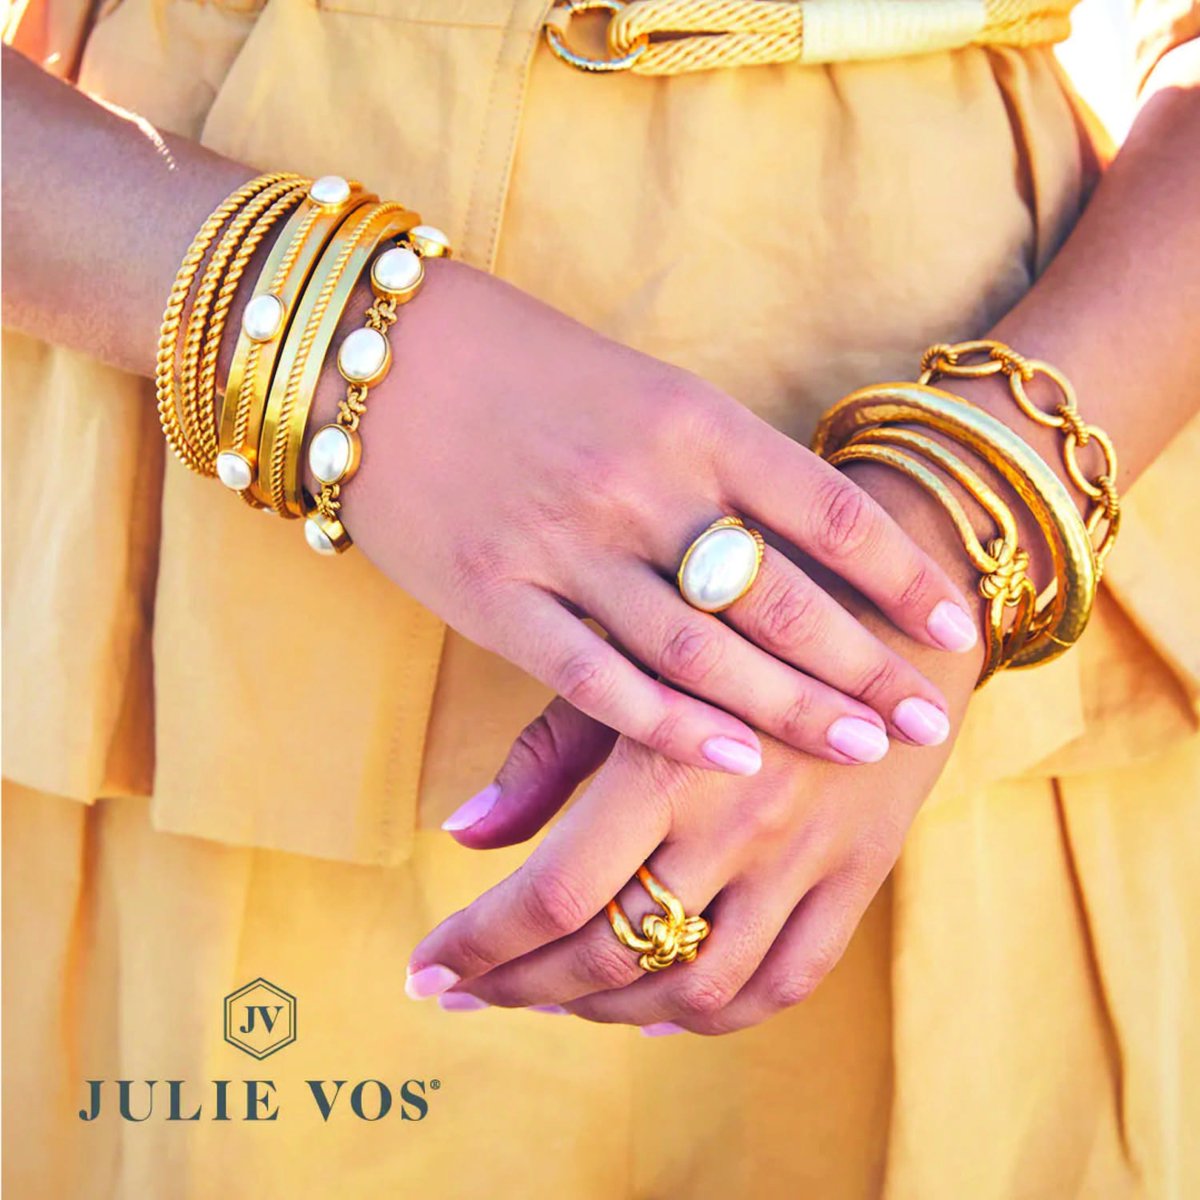 A pearlescent #ArmParty, featuring new jewels from the Nassau Collection by #JulieVos at #AlexandersJwlrs 💛

#PearlJewelry #StatementJewelry #PopofPearl #SpringStyle